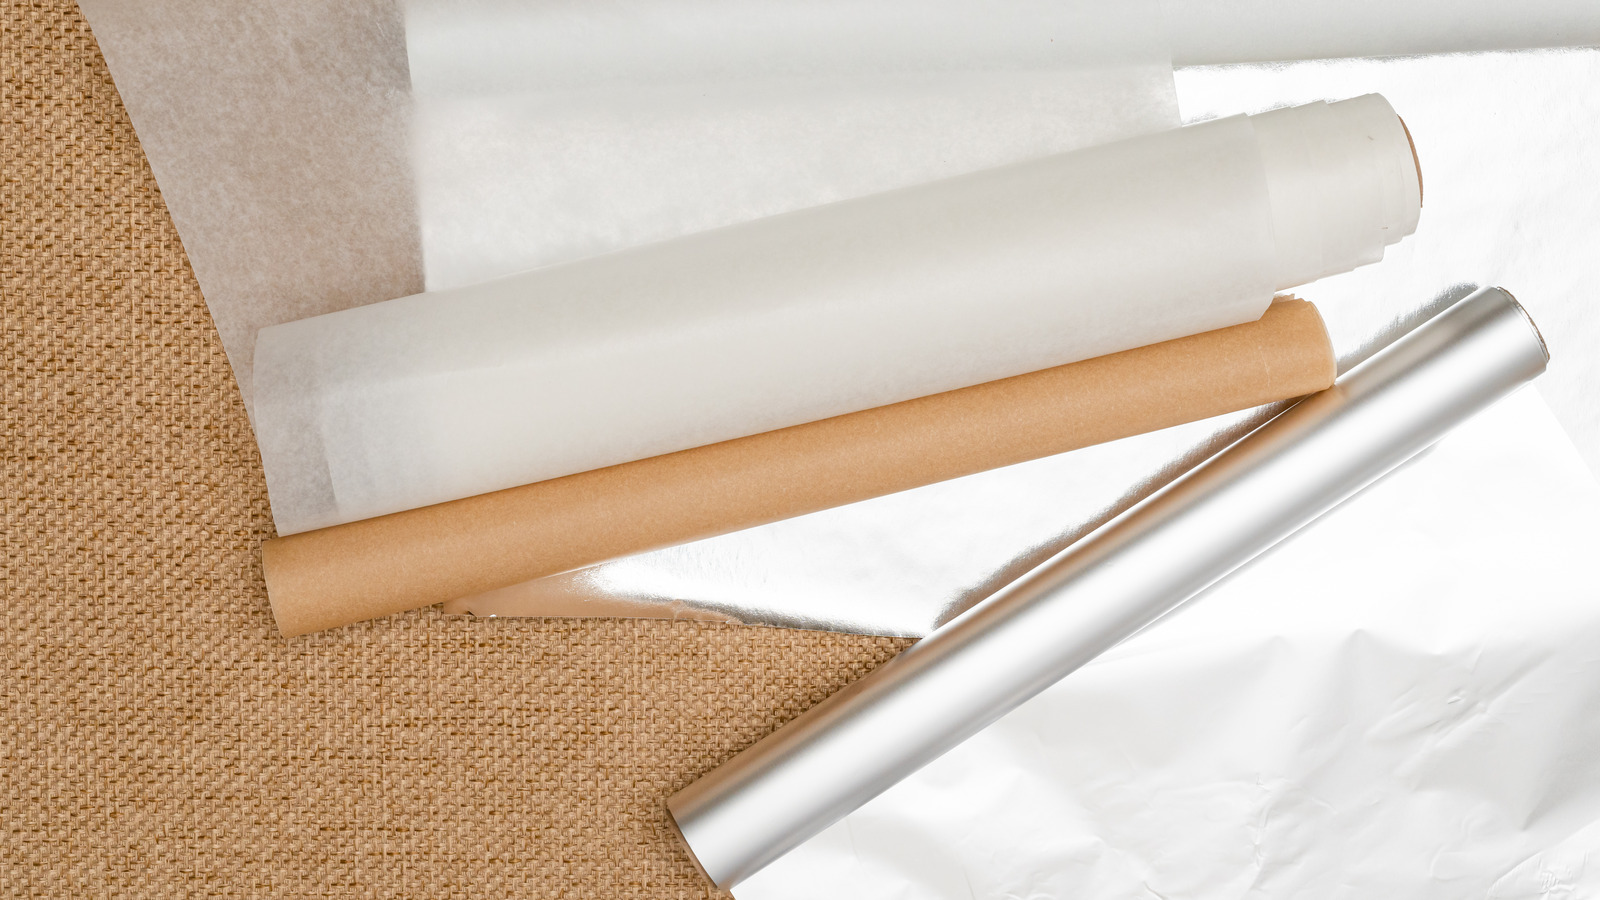 Parchment Paper Vs. Wax Paper: When To Use Each